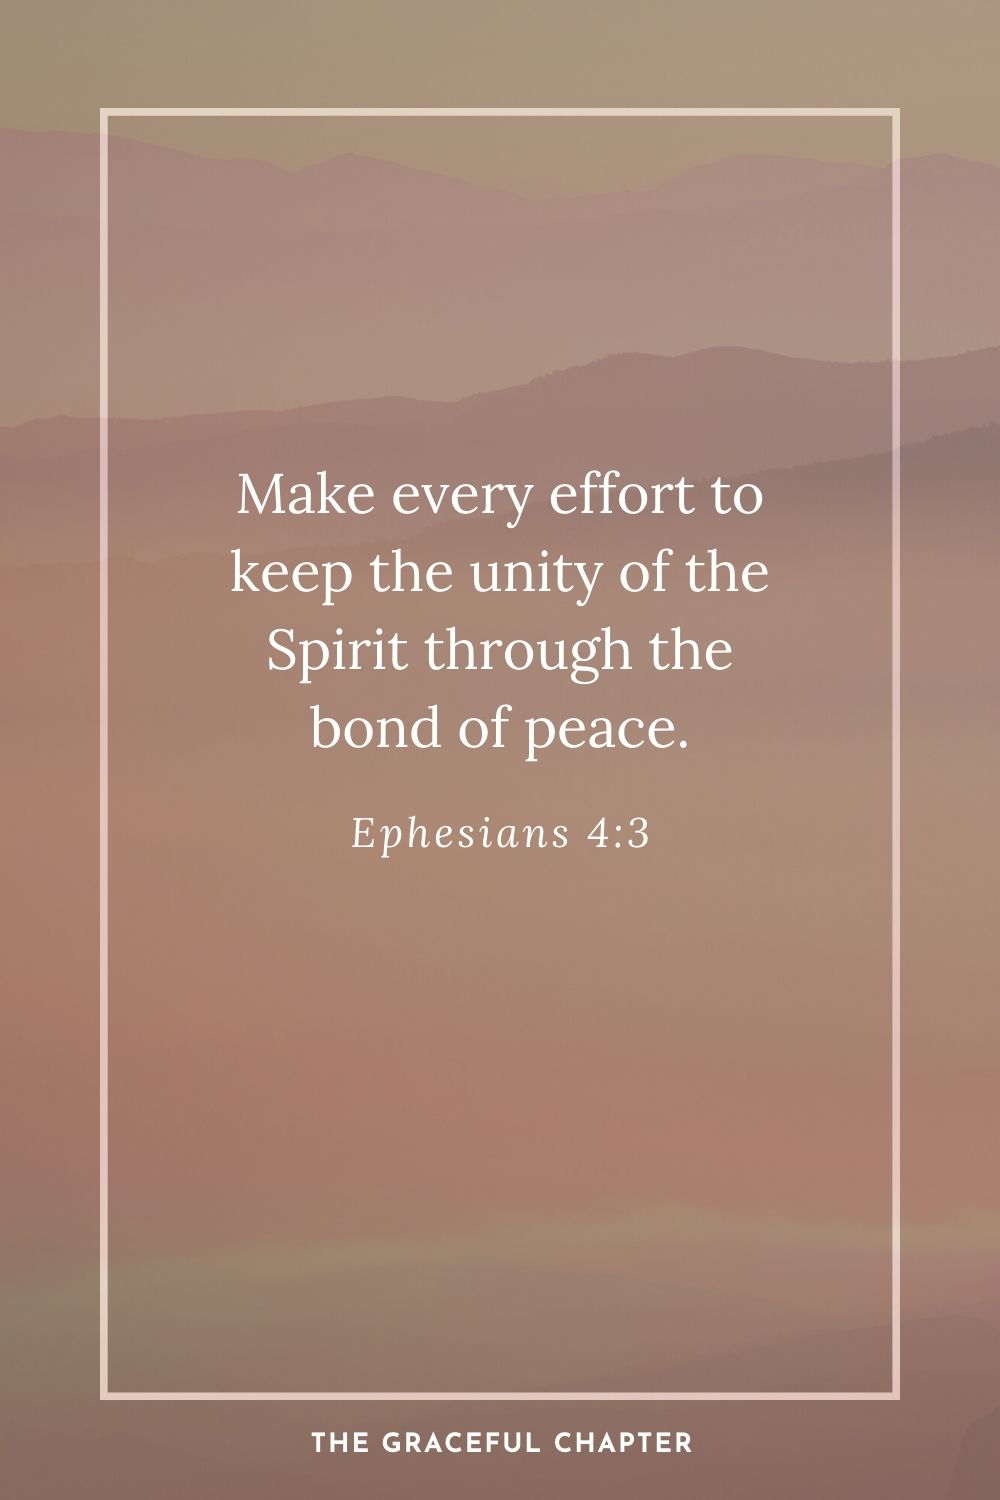 Make every effort to keep the unity of the Spirit through the bond of peace. Ephesians 4:3